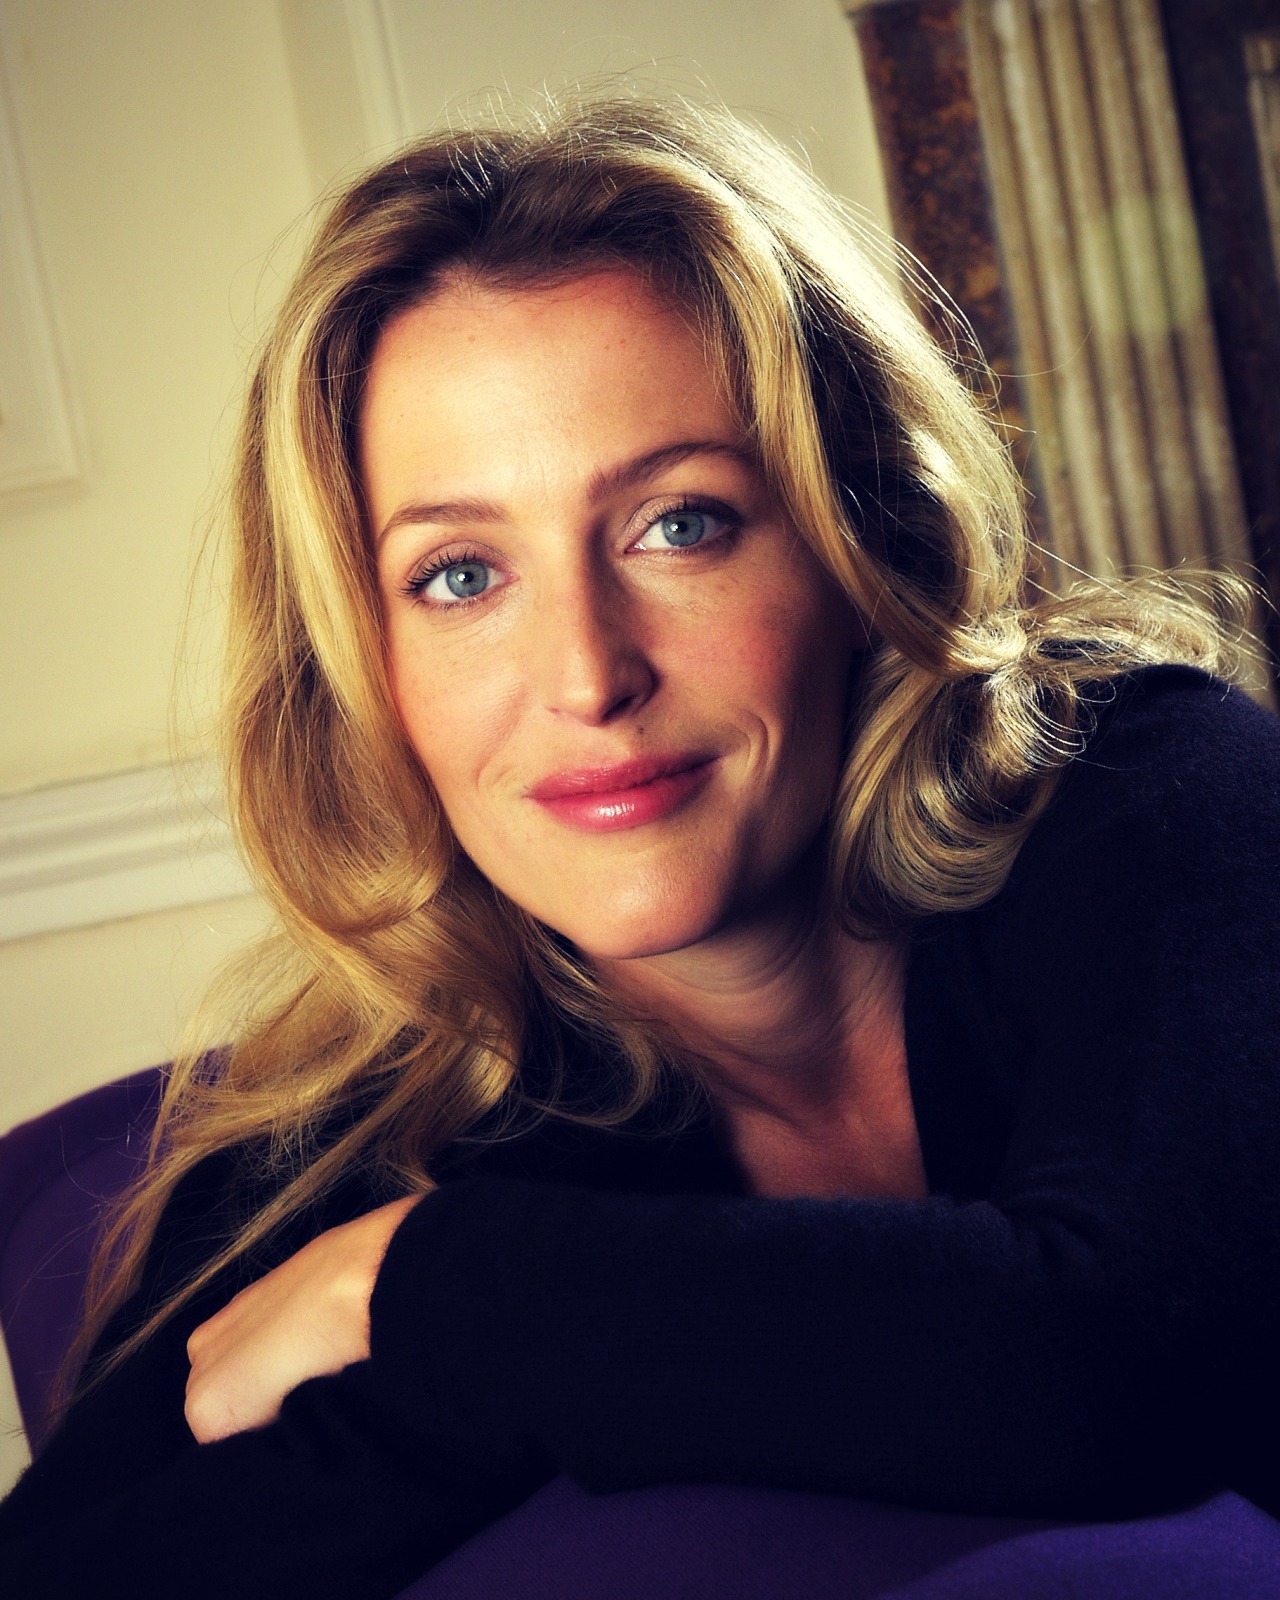 “I used to take myself very seriously, now it’s all just funny. You gotta laugh at yourself. You know, most of the time when something’s a big deal for us, it’s only become a big deal in the space between our ears.”
- Gillian Anderson